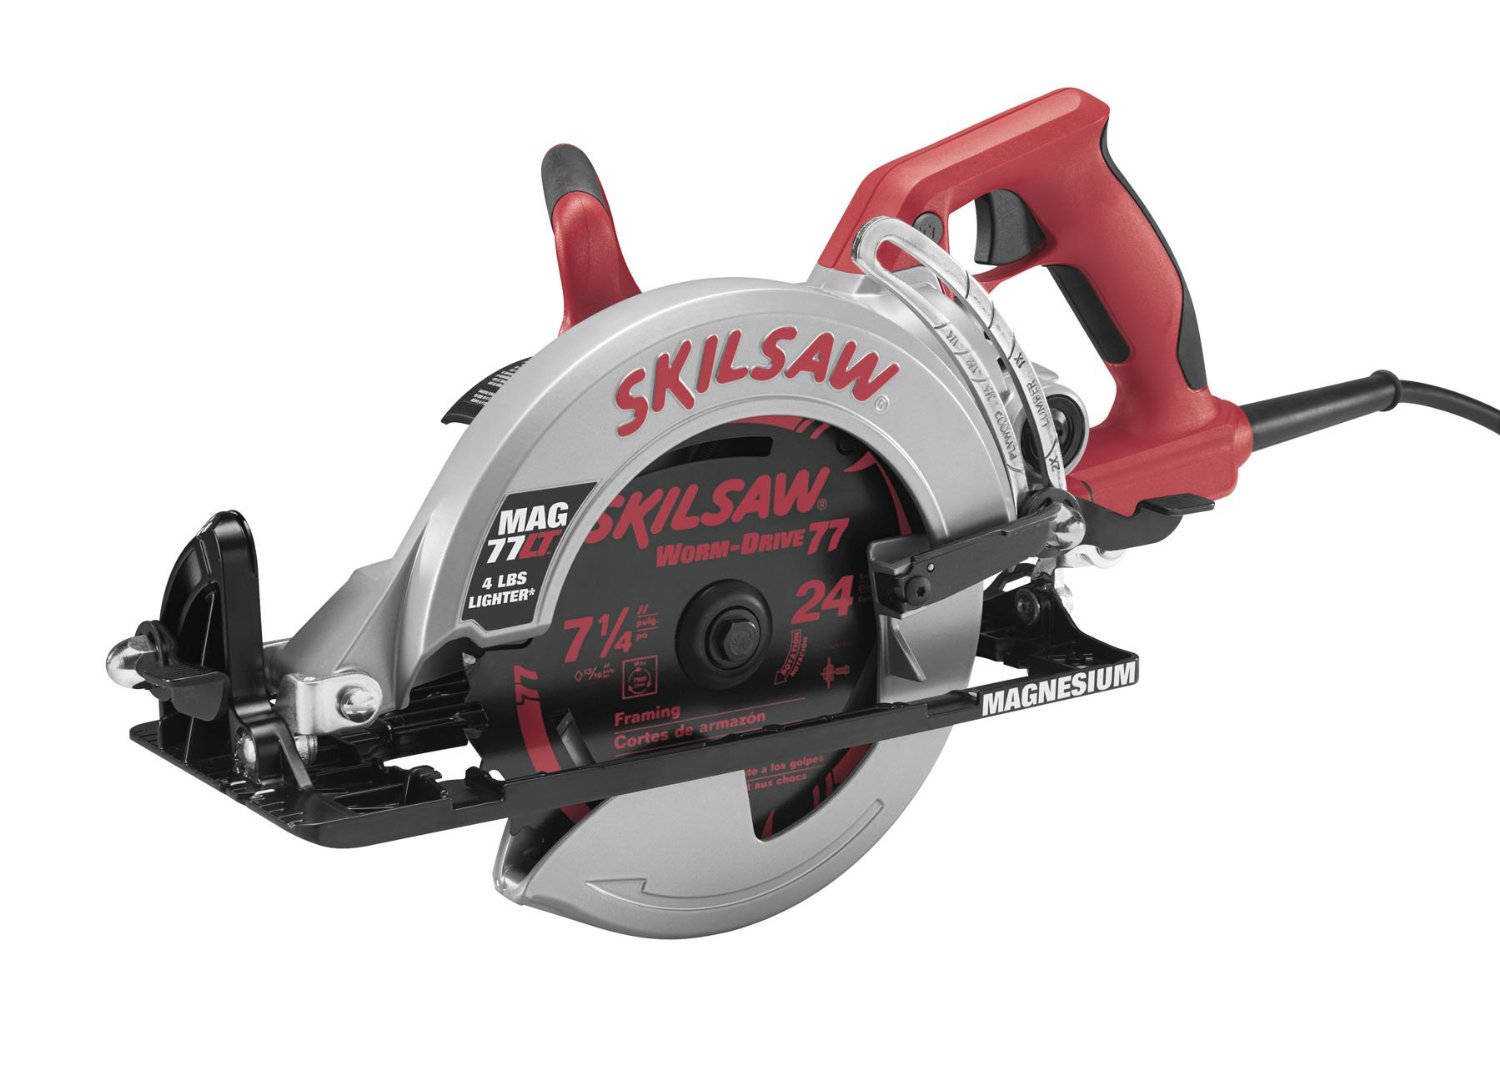 Skilsaw 15-Amp Worm Drive Corded Circular Saw, Red